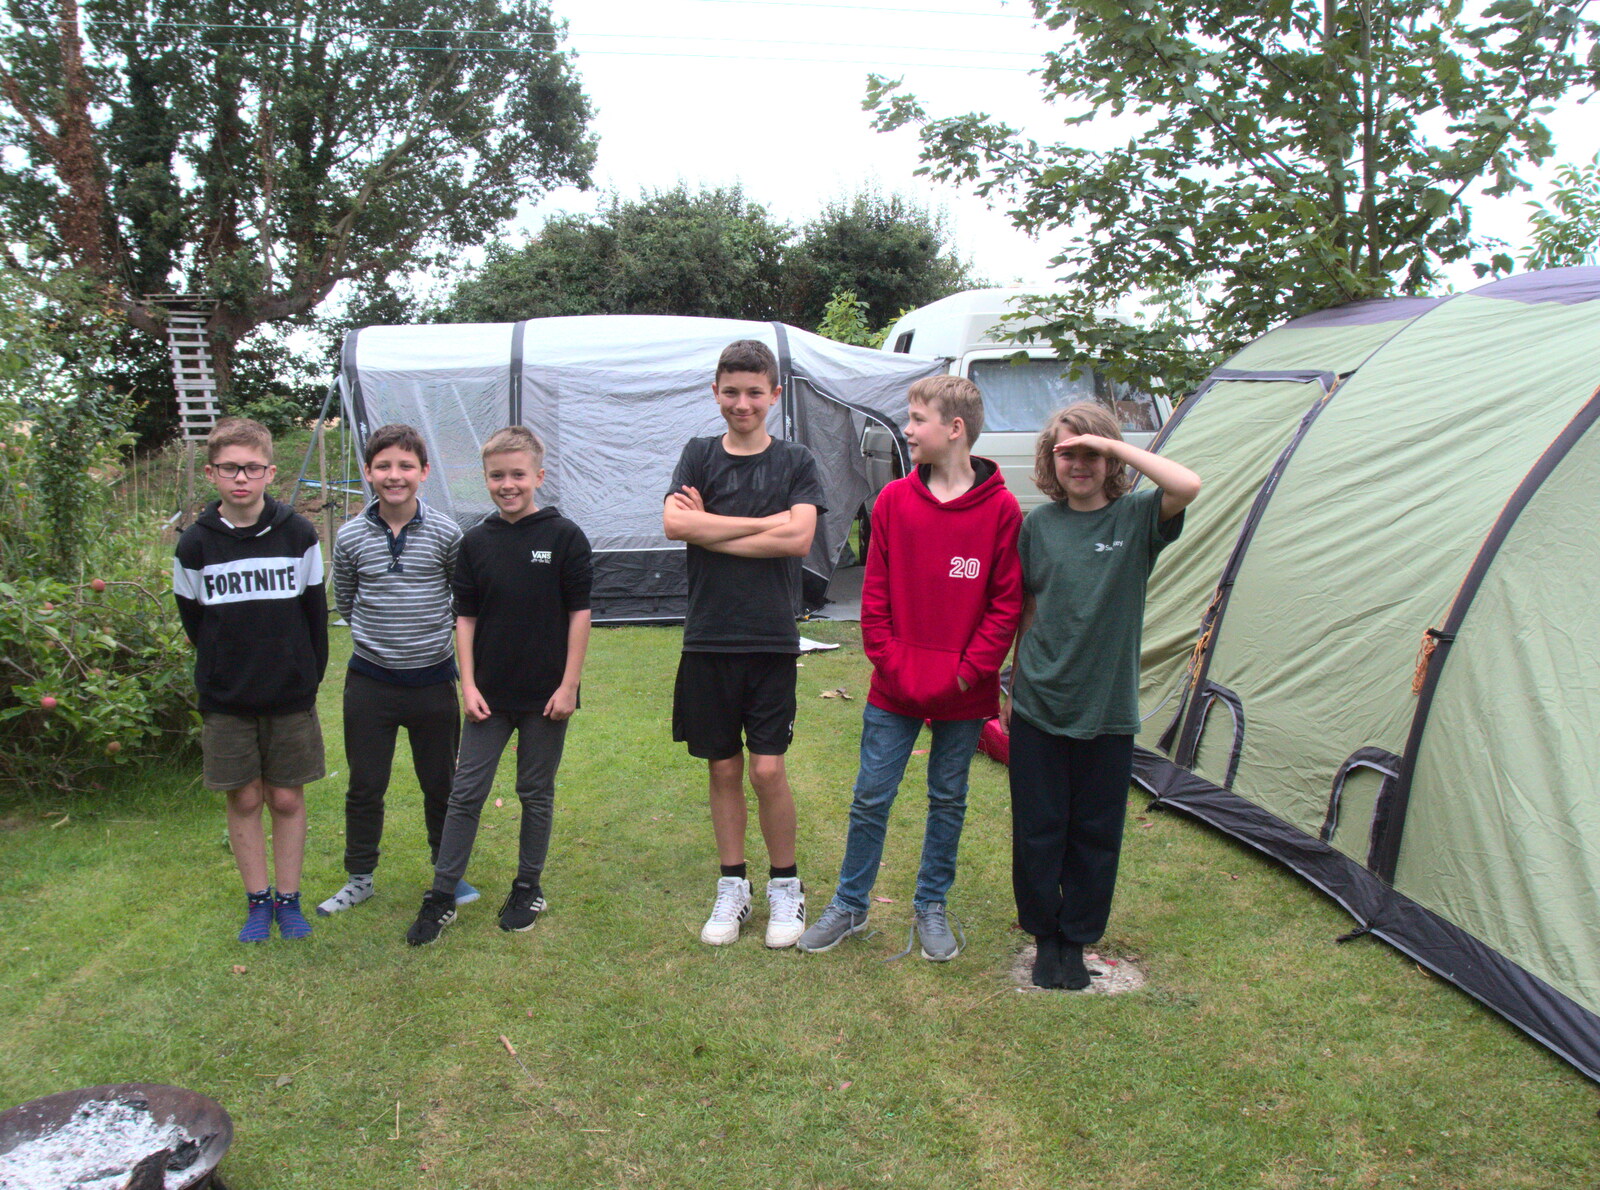 The camping posse from The BSCC at Redgrave and Station 119, Eye, Suffolk - 17th July 2020